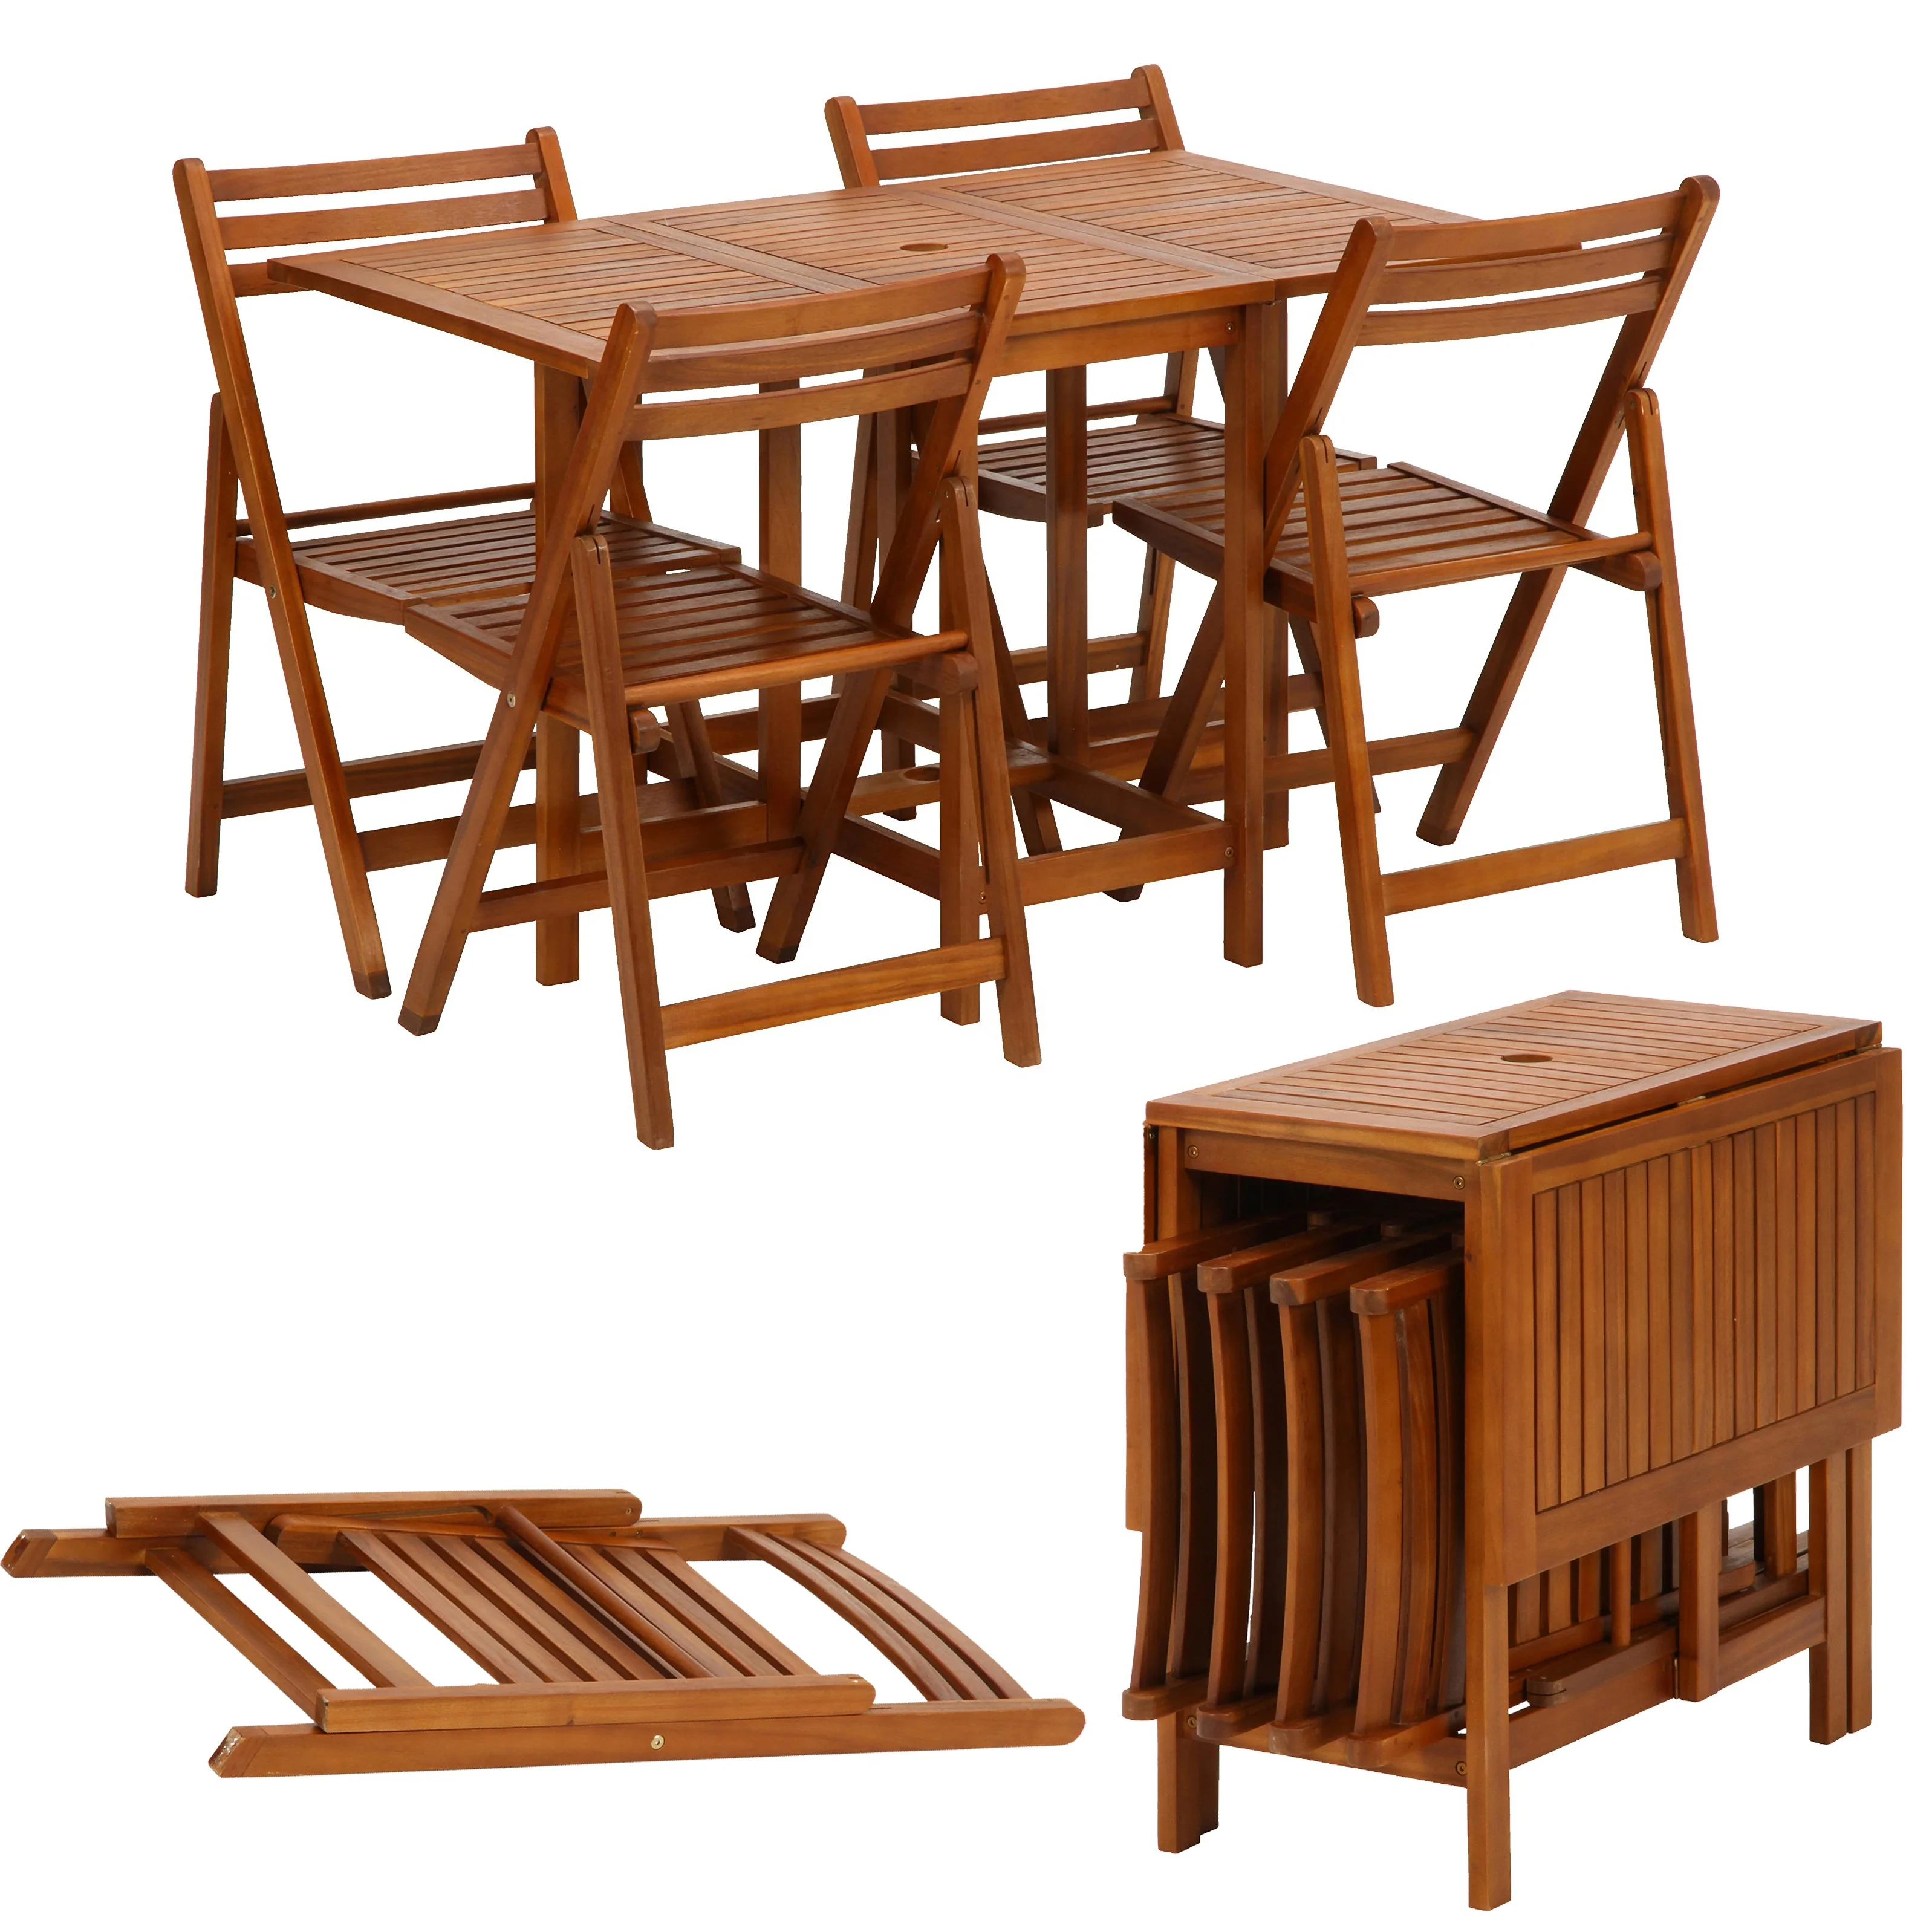 Foldable Garden Wood Folding Table and Chair Set Portable Waterproof Bamboo Wood Dining Table with Chair Sets Indoor Outdoor